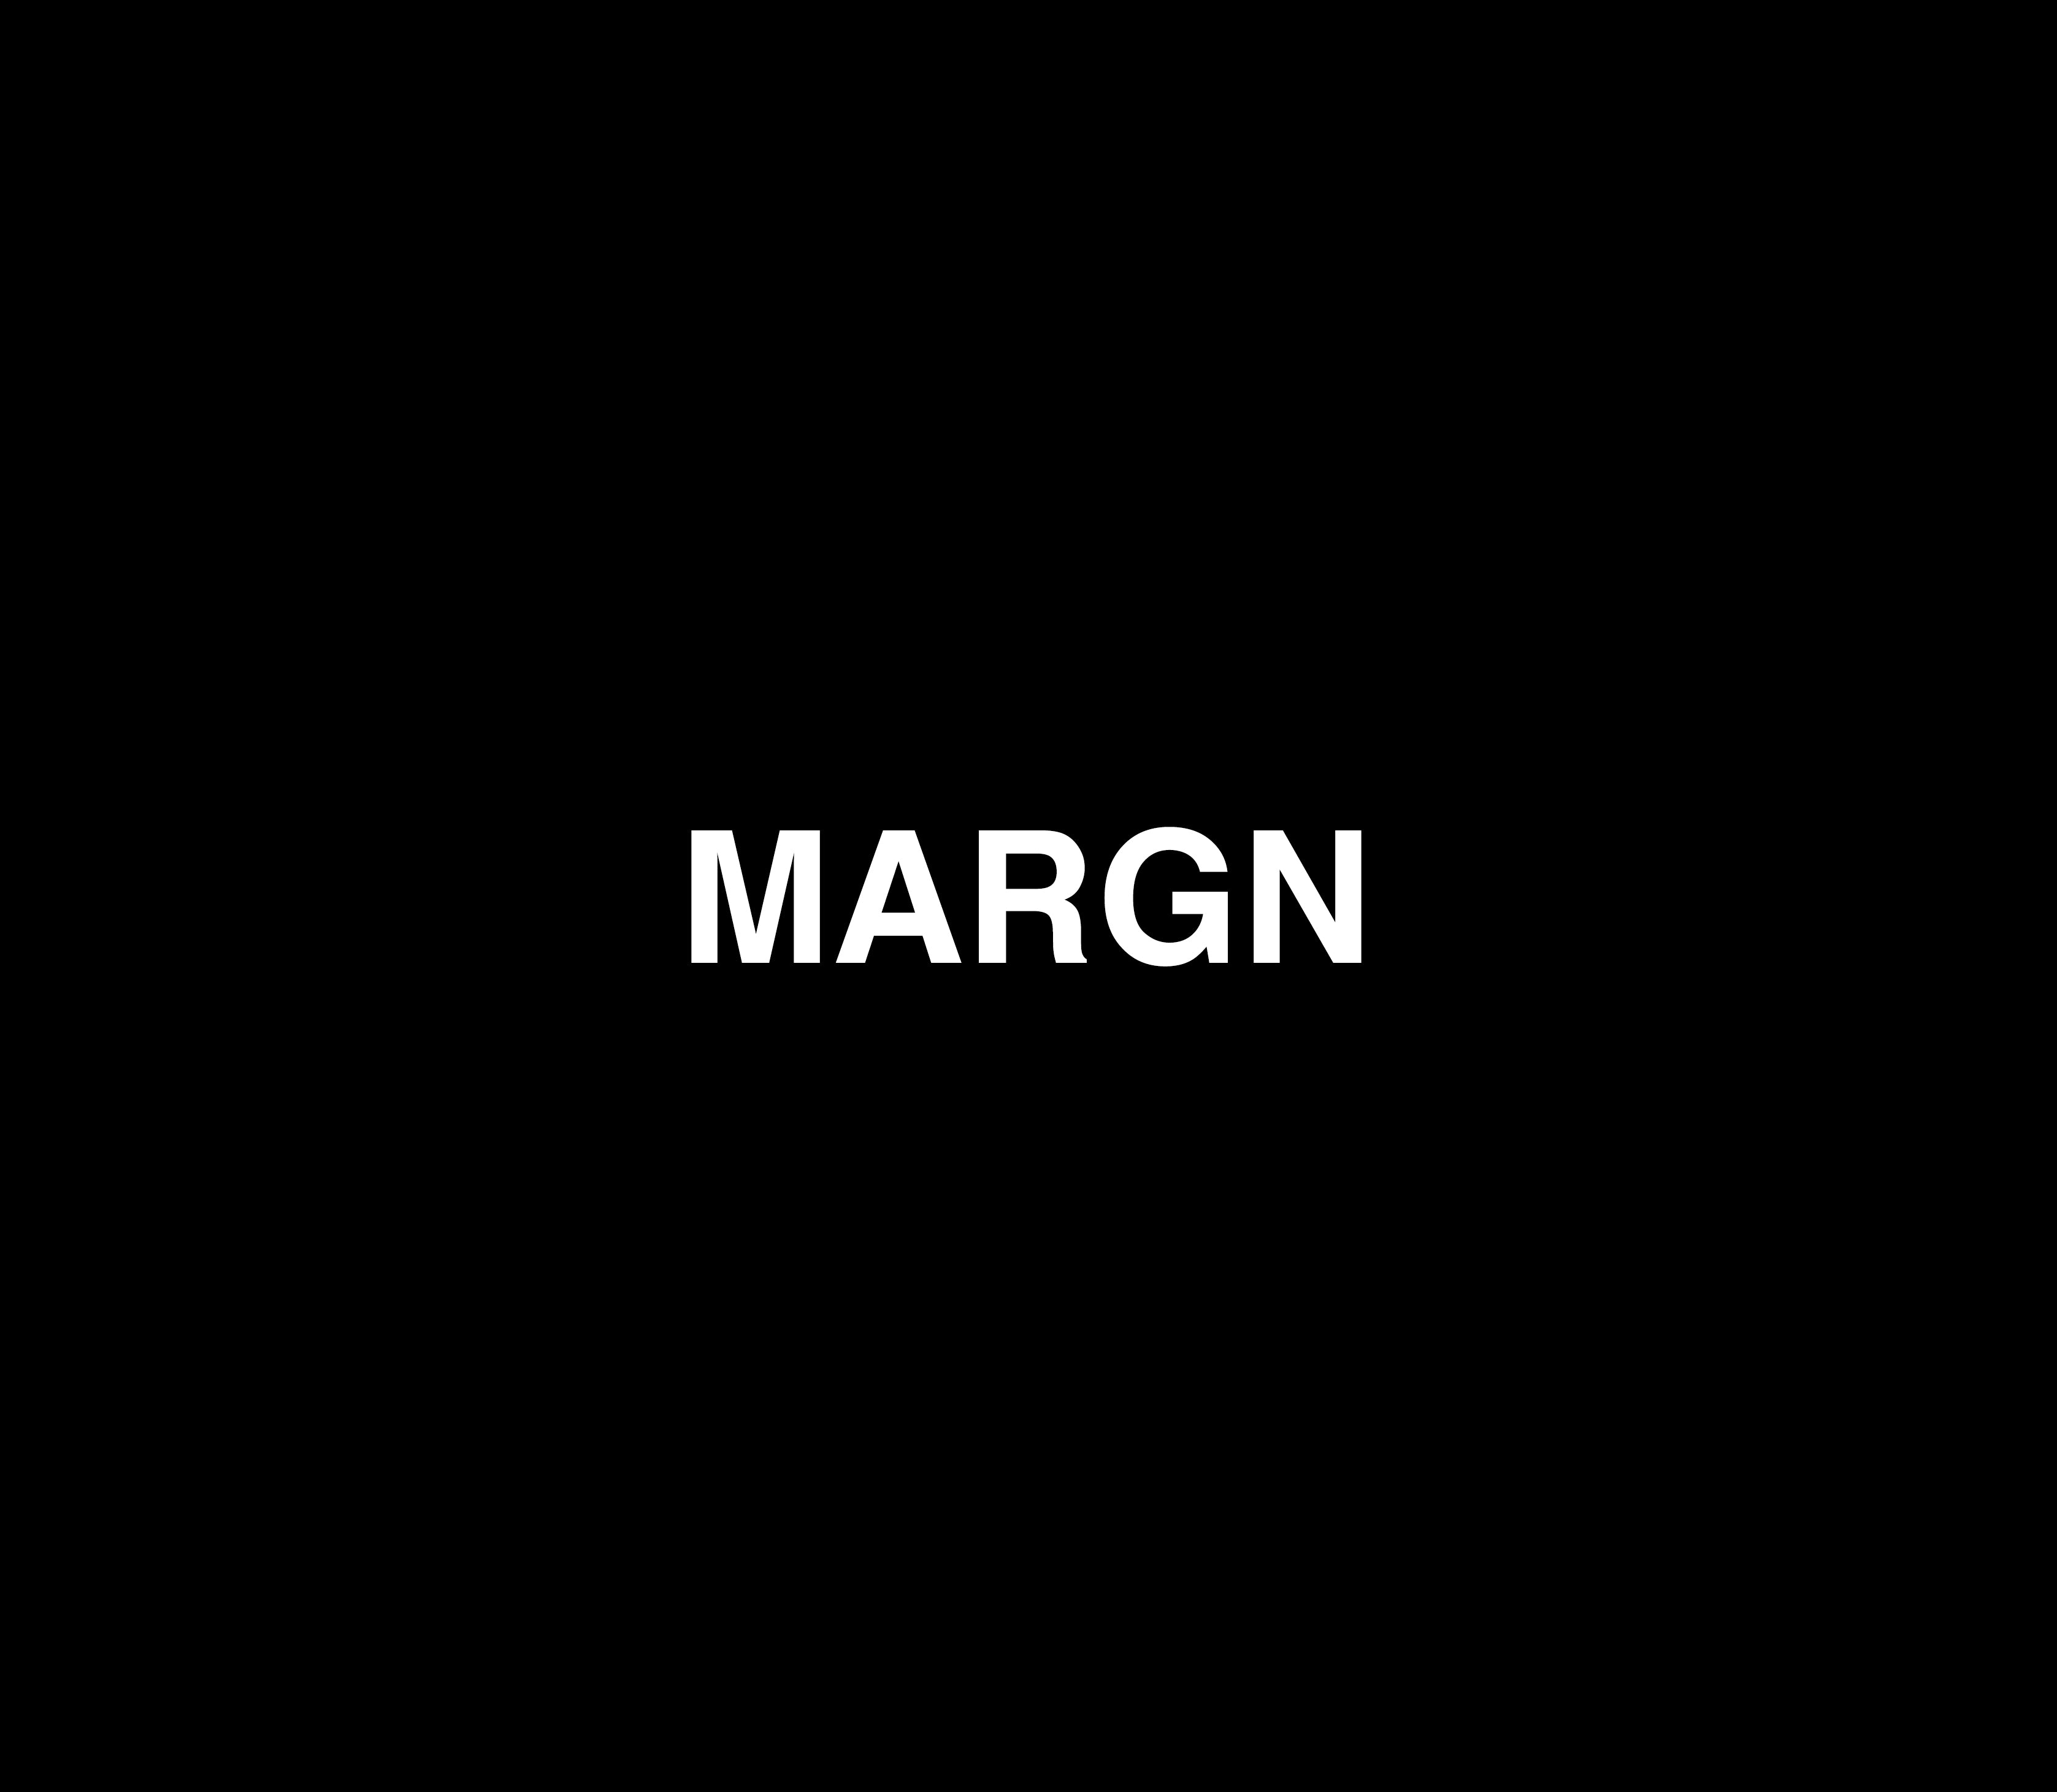 MARGN